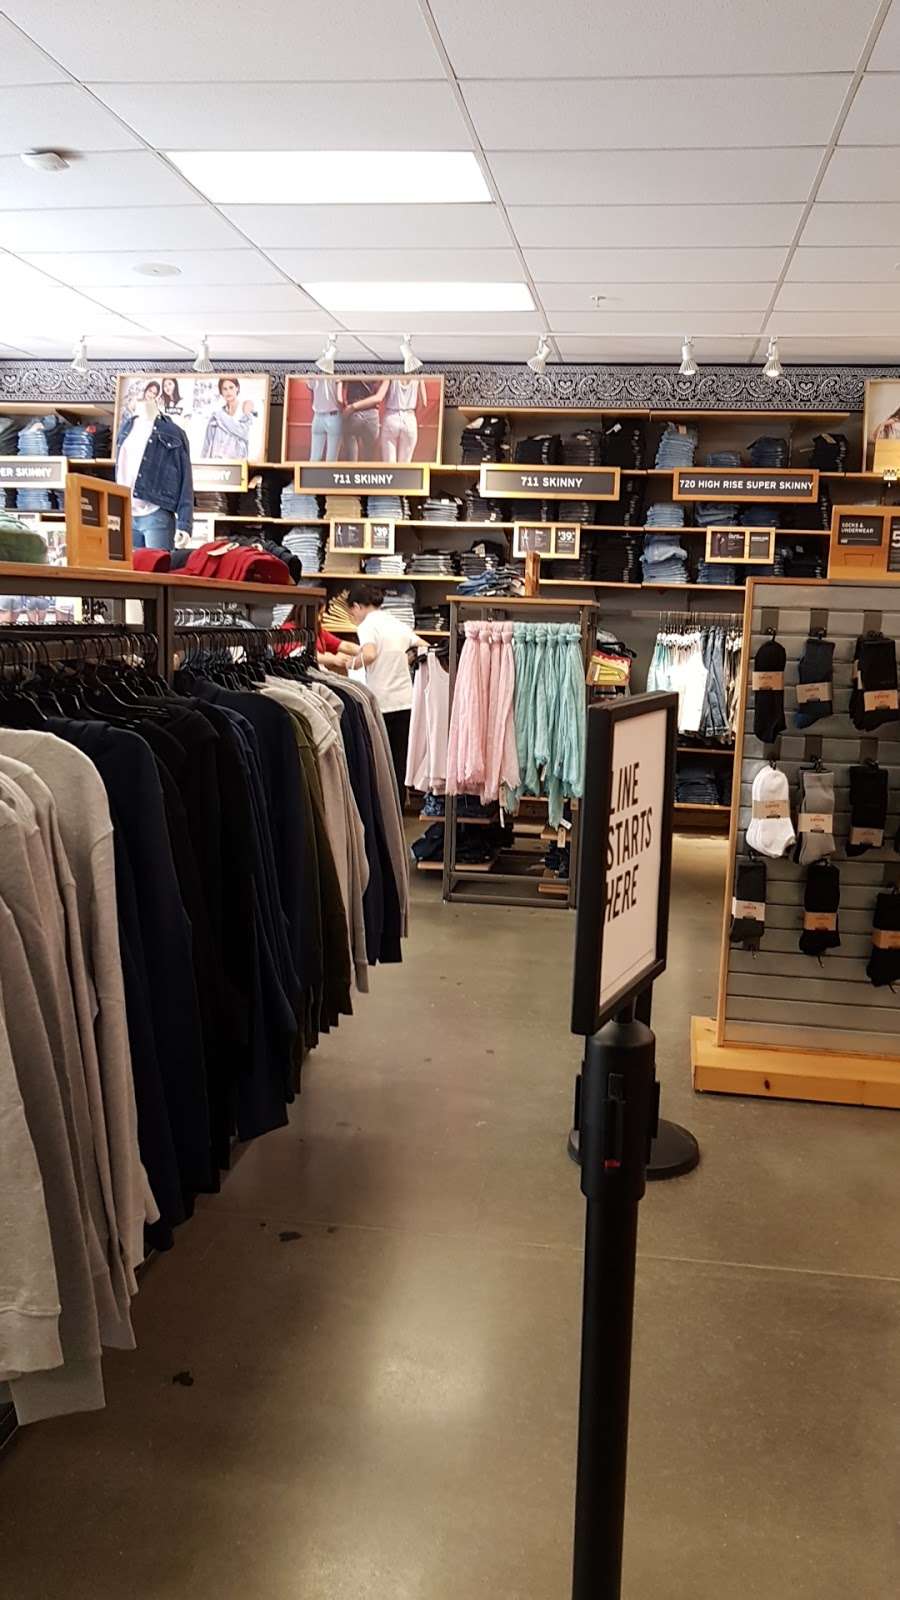 levi's store at tanger outlet